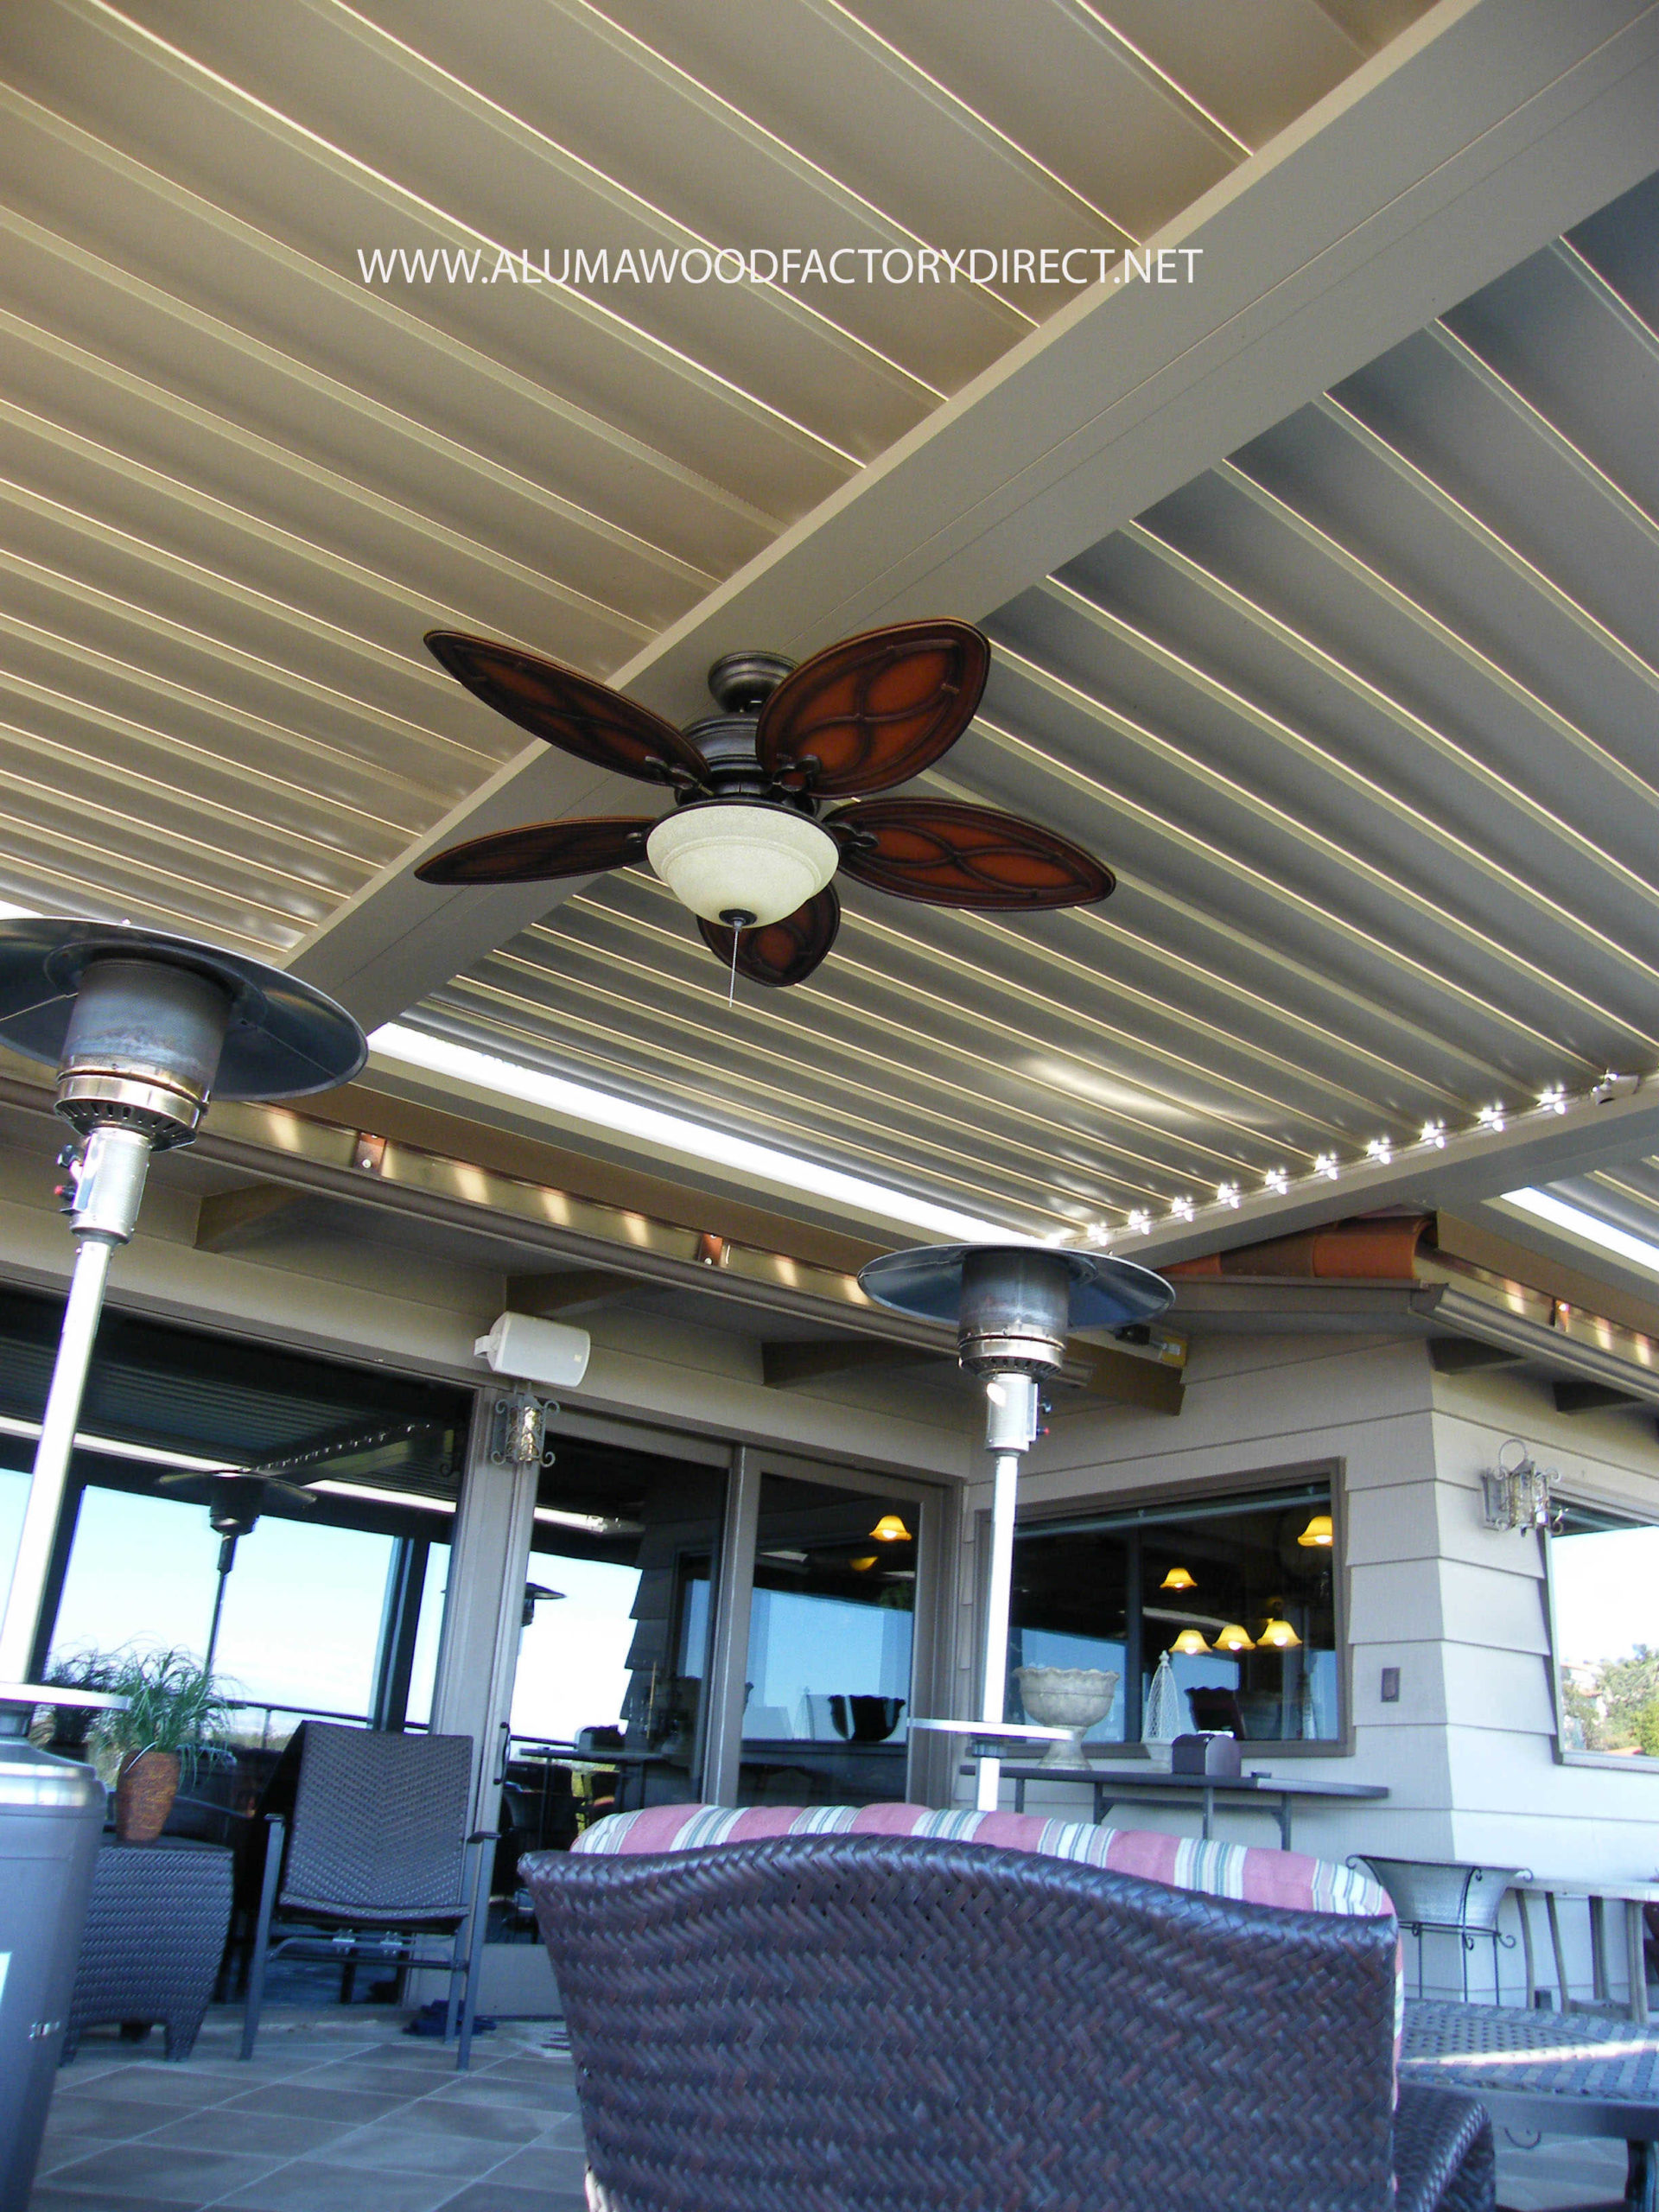 " Equinox Louvered Roof System"